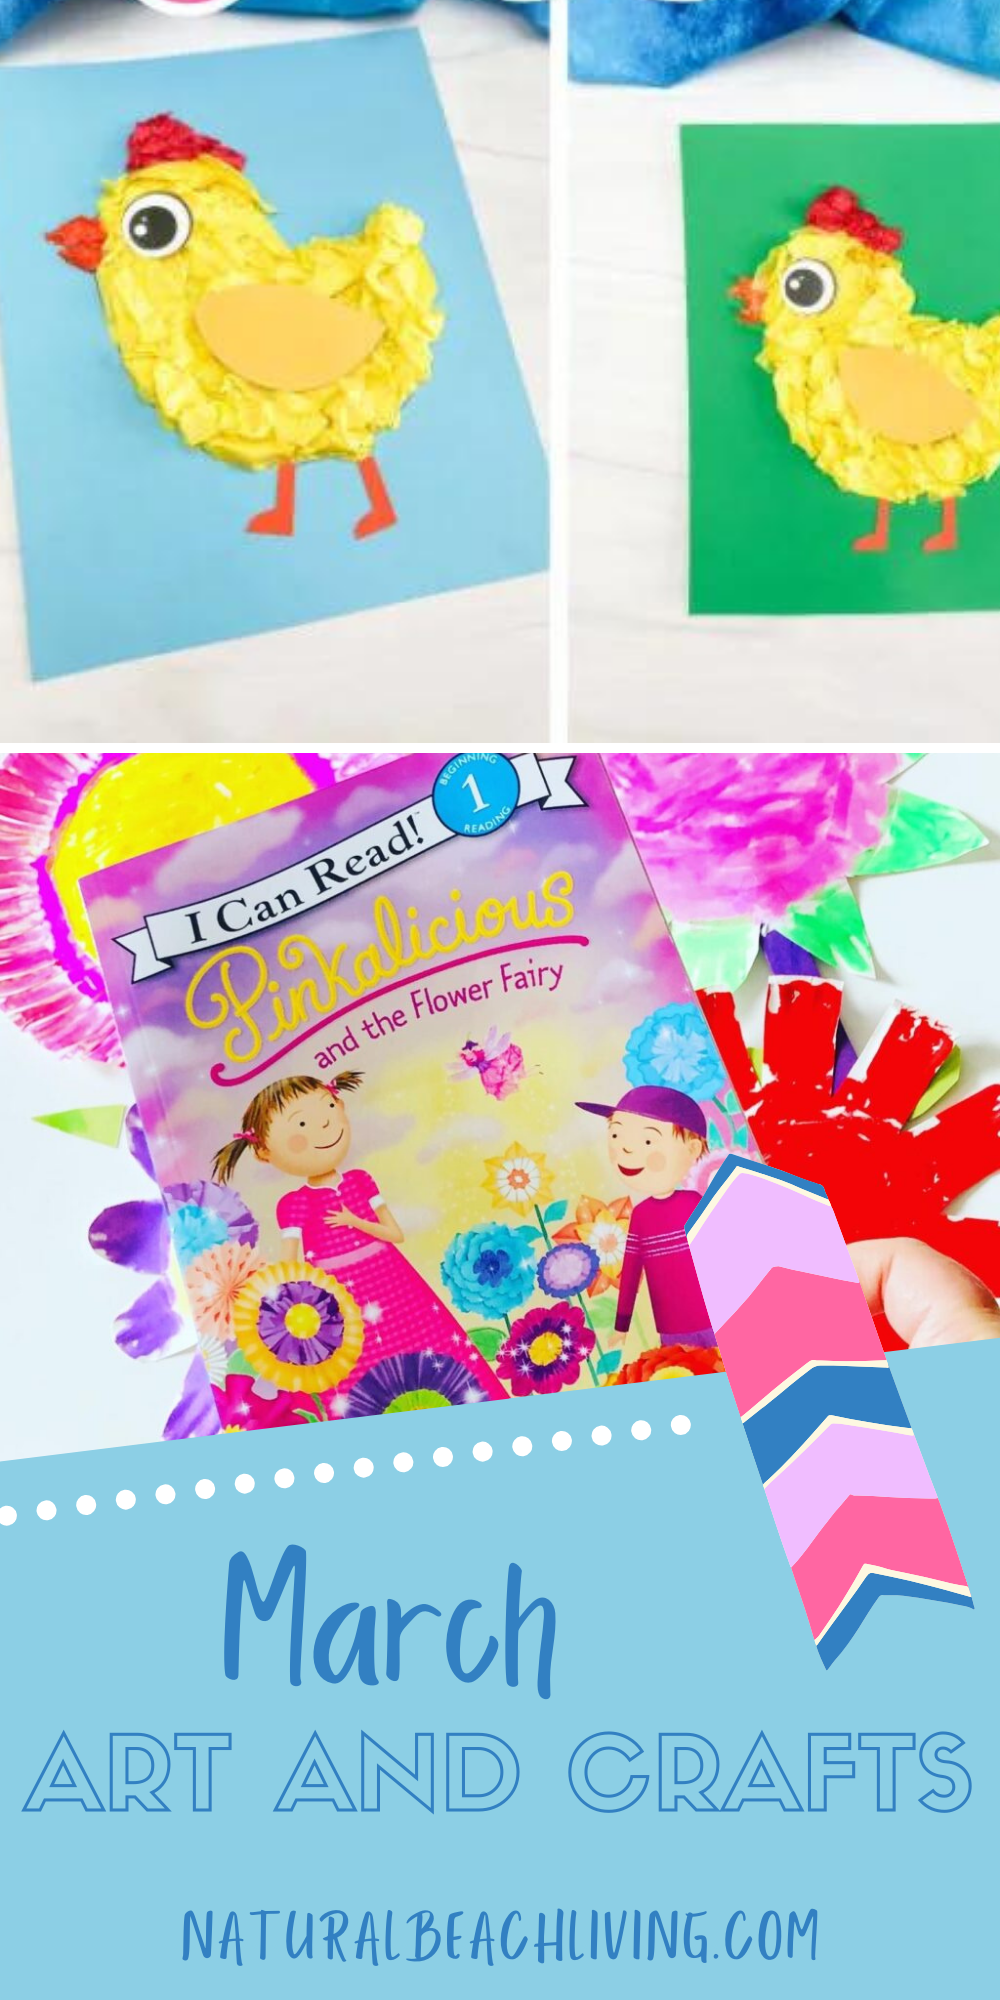 Here are the best March Art Activities and Crafts for Kids, including weather, flowers, rainbows, St Patrick's Day, Spring Themes, and arts and crafts projects for kids! These March crafts for kids are perfect for preschoolers, toddlers, kindergarteners, and children of all ages!